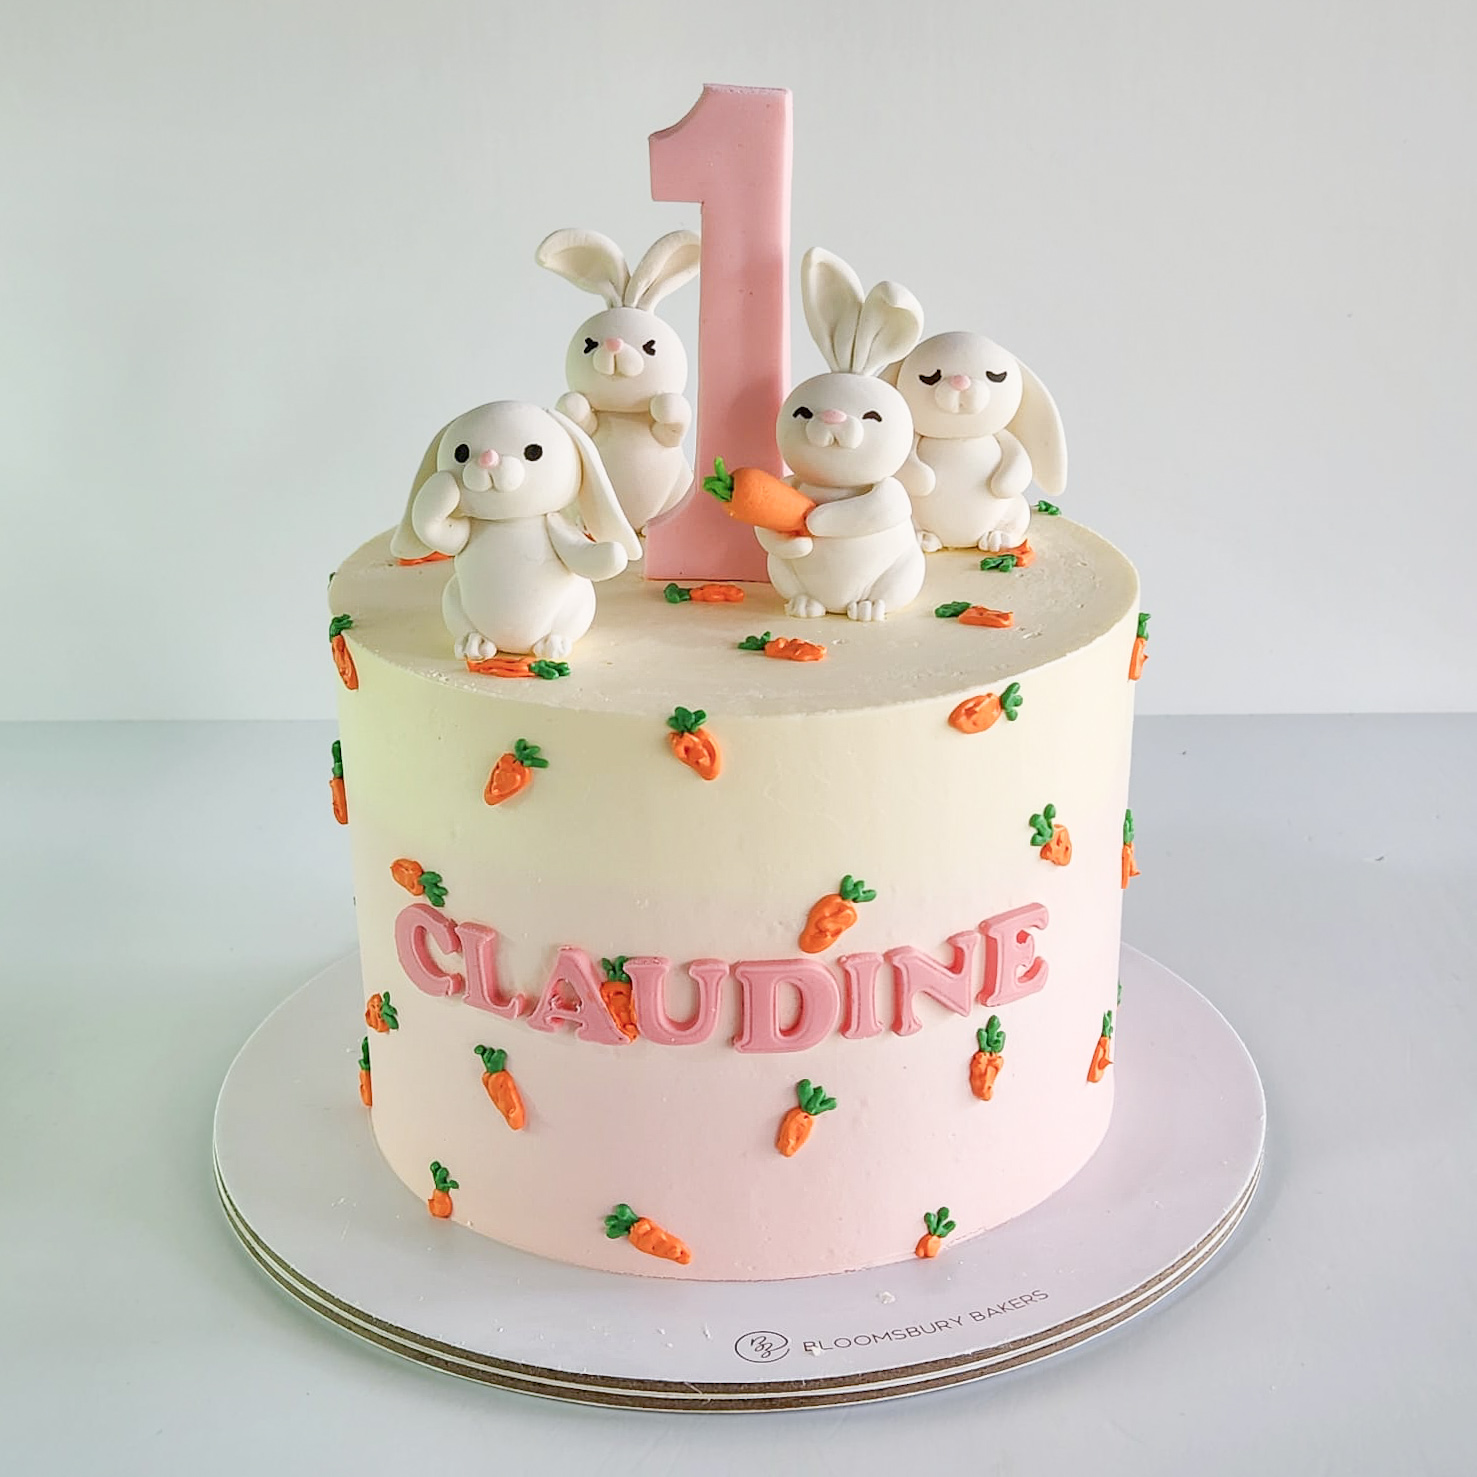 [KB4] Bunnies and Carrots Cake